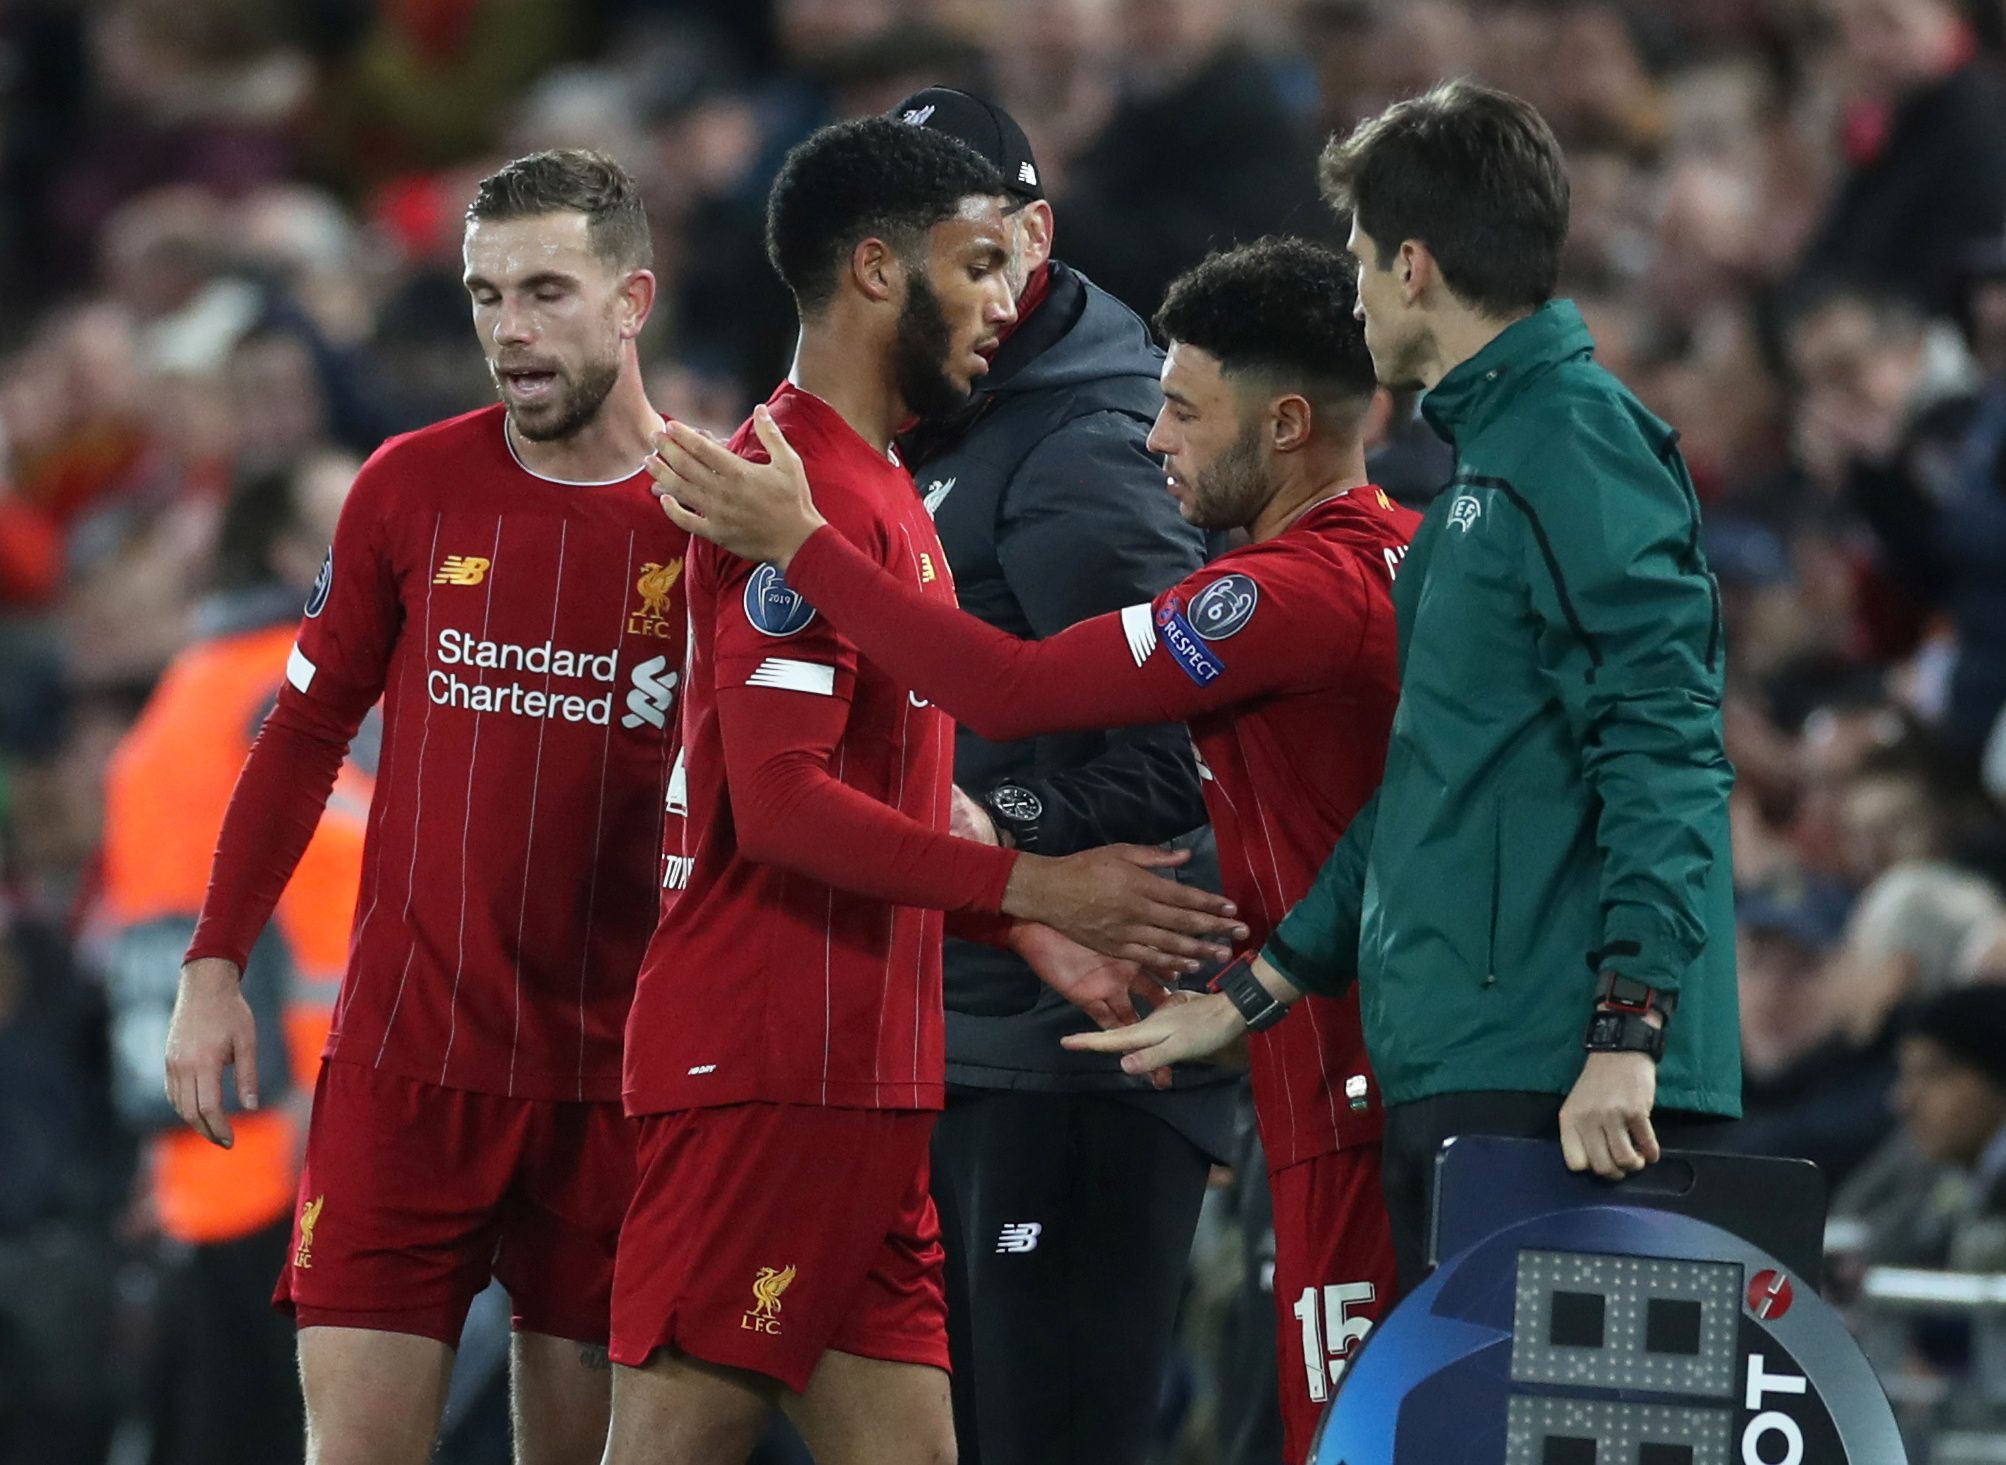 Soccer Football - Champions League - Group E - Liverpool v Napoli - Anfield, Liverpool, Britain - November 27, 2019  Liverpool's Alex Oxlade-Chamberlain comes on as a substitute to replace Joe Gomez   Action Images via Reuters/Carl Recine